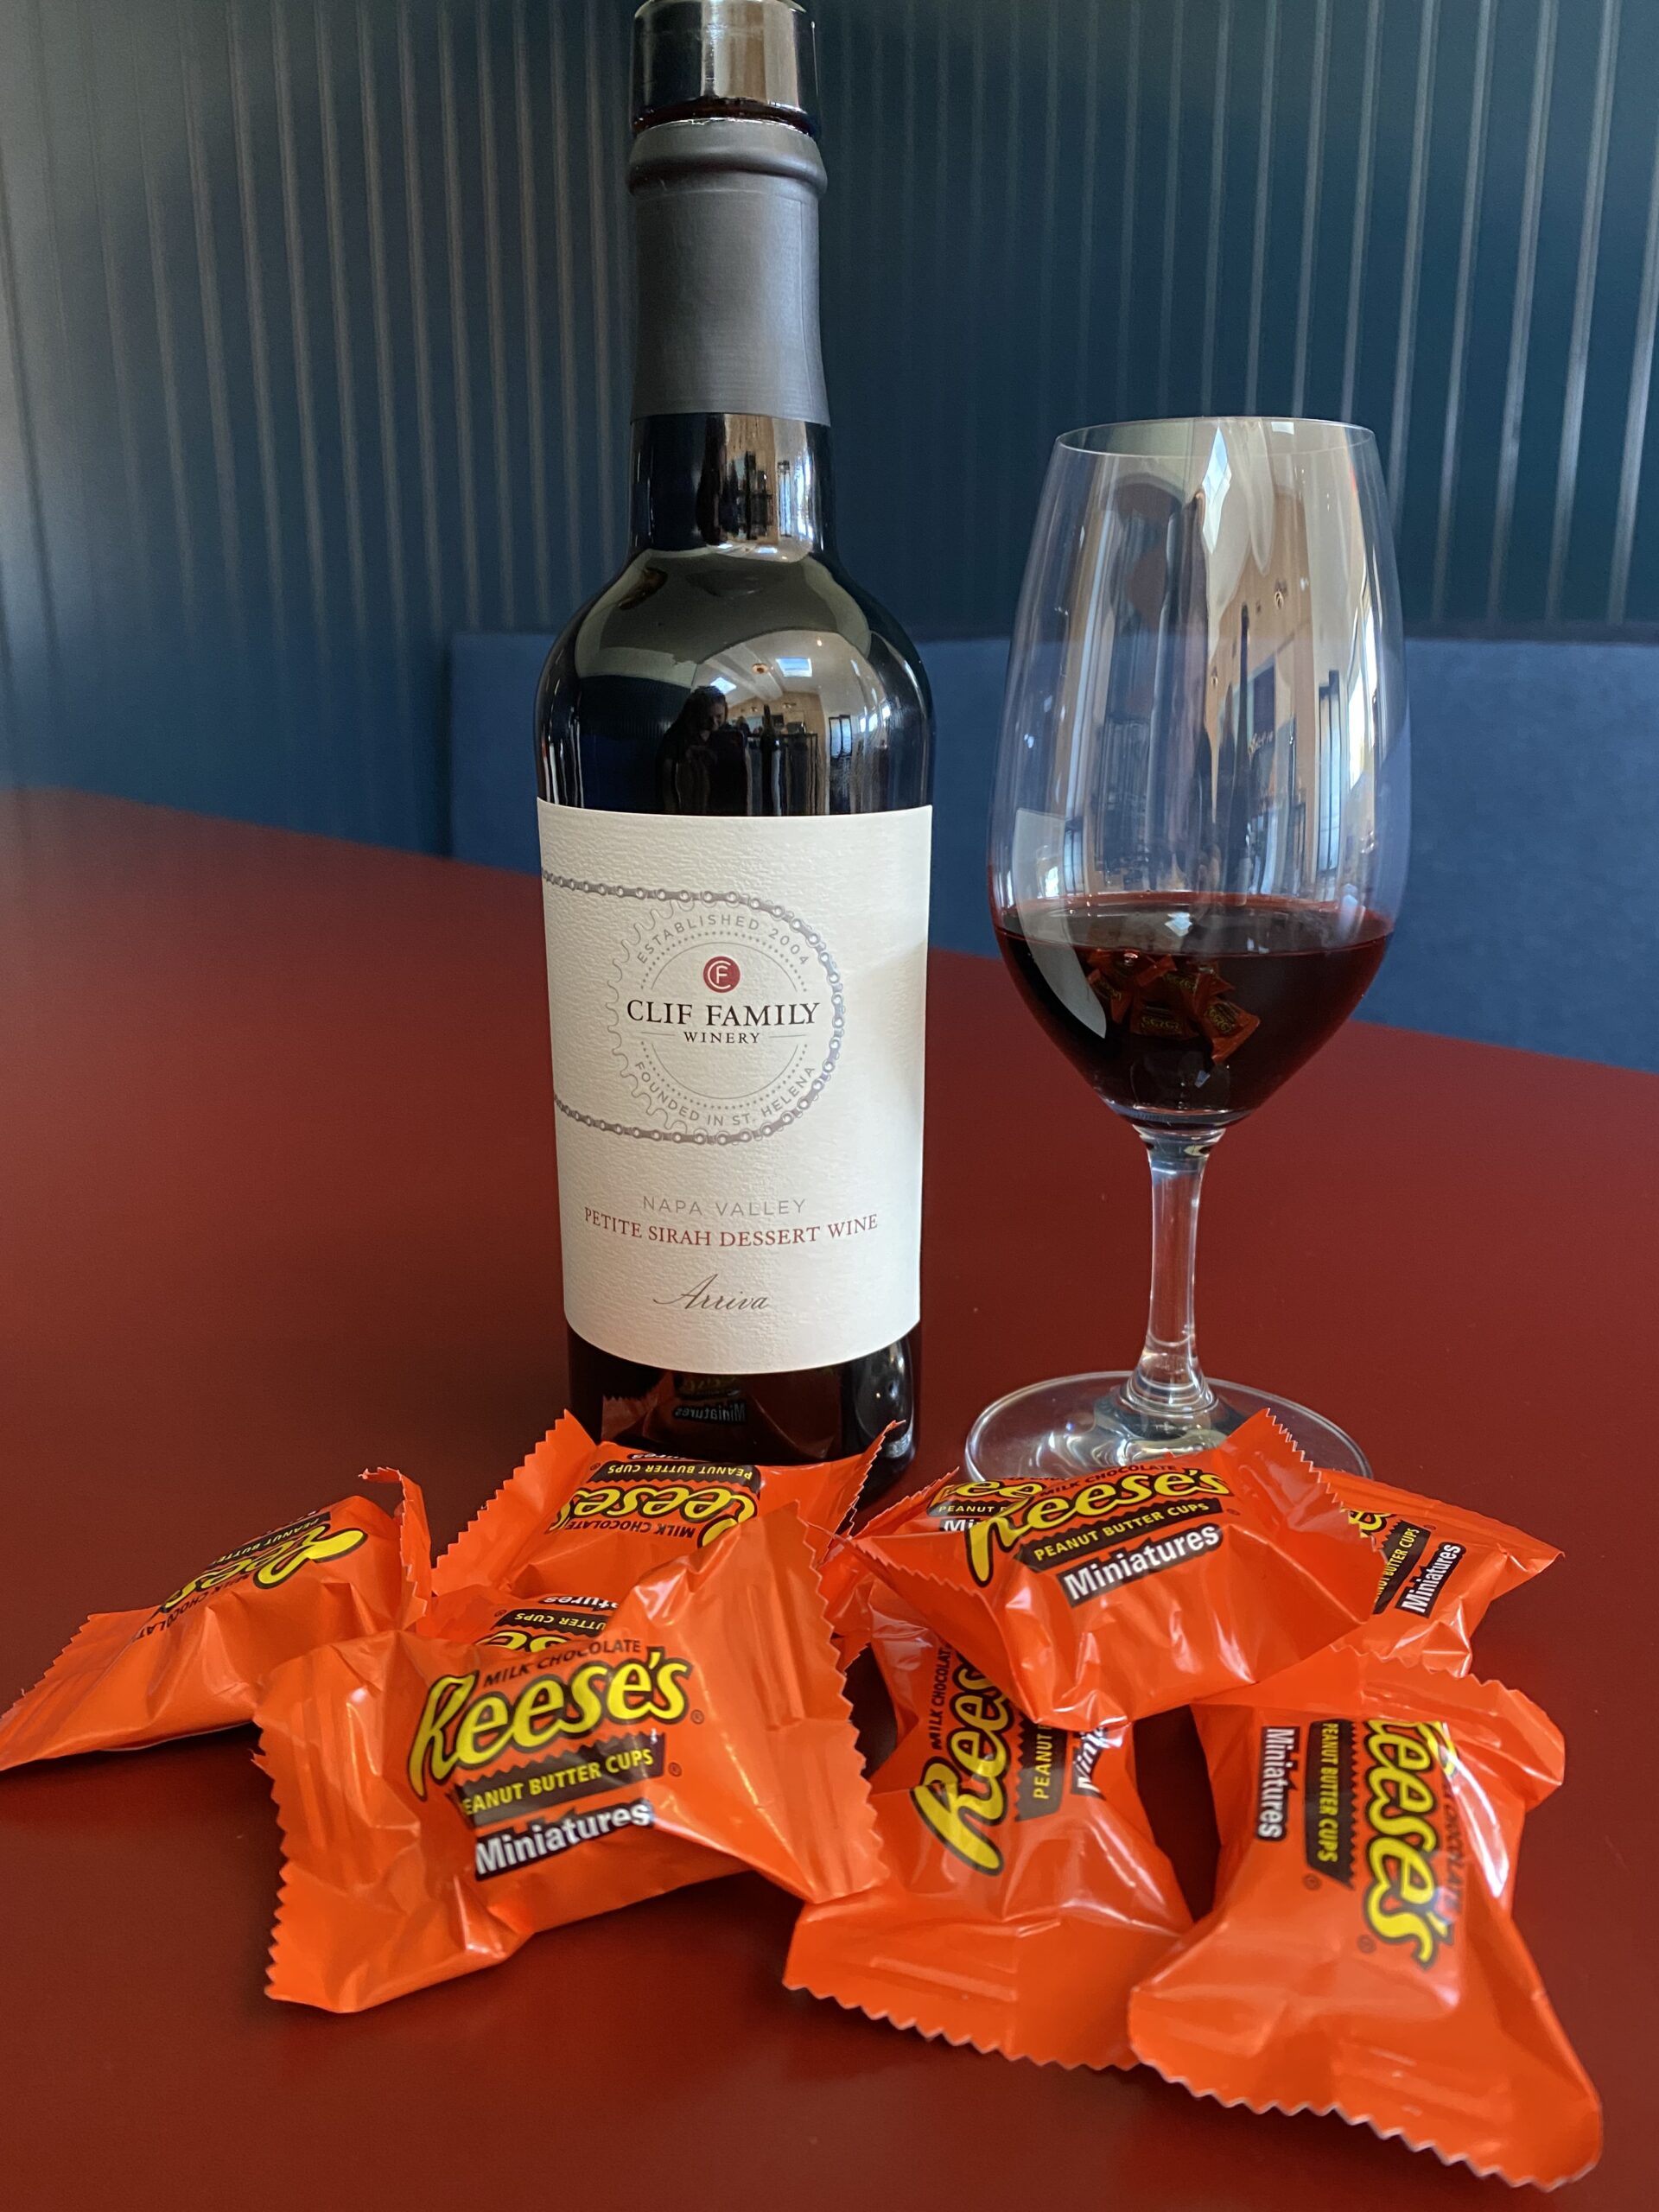 Reese's and Clif Family Dessert Wine